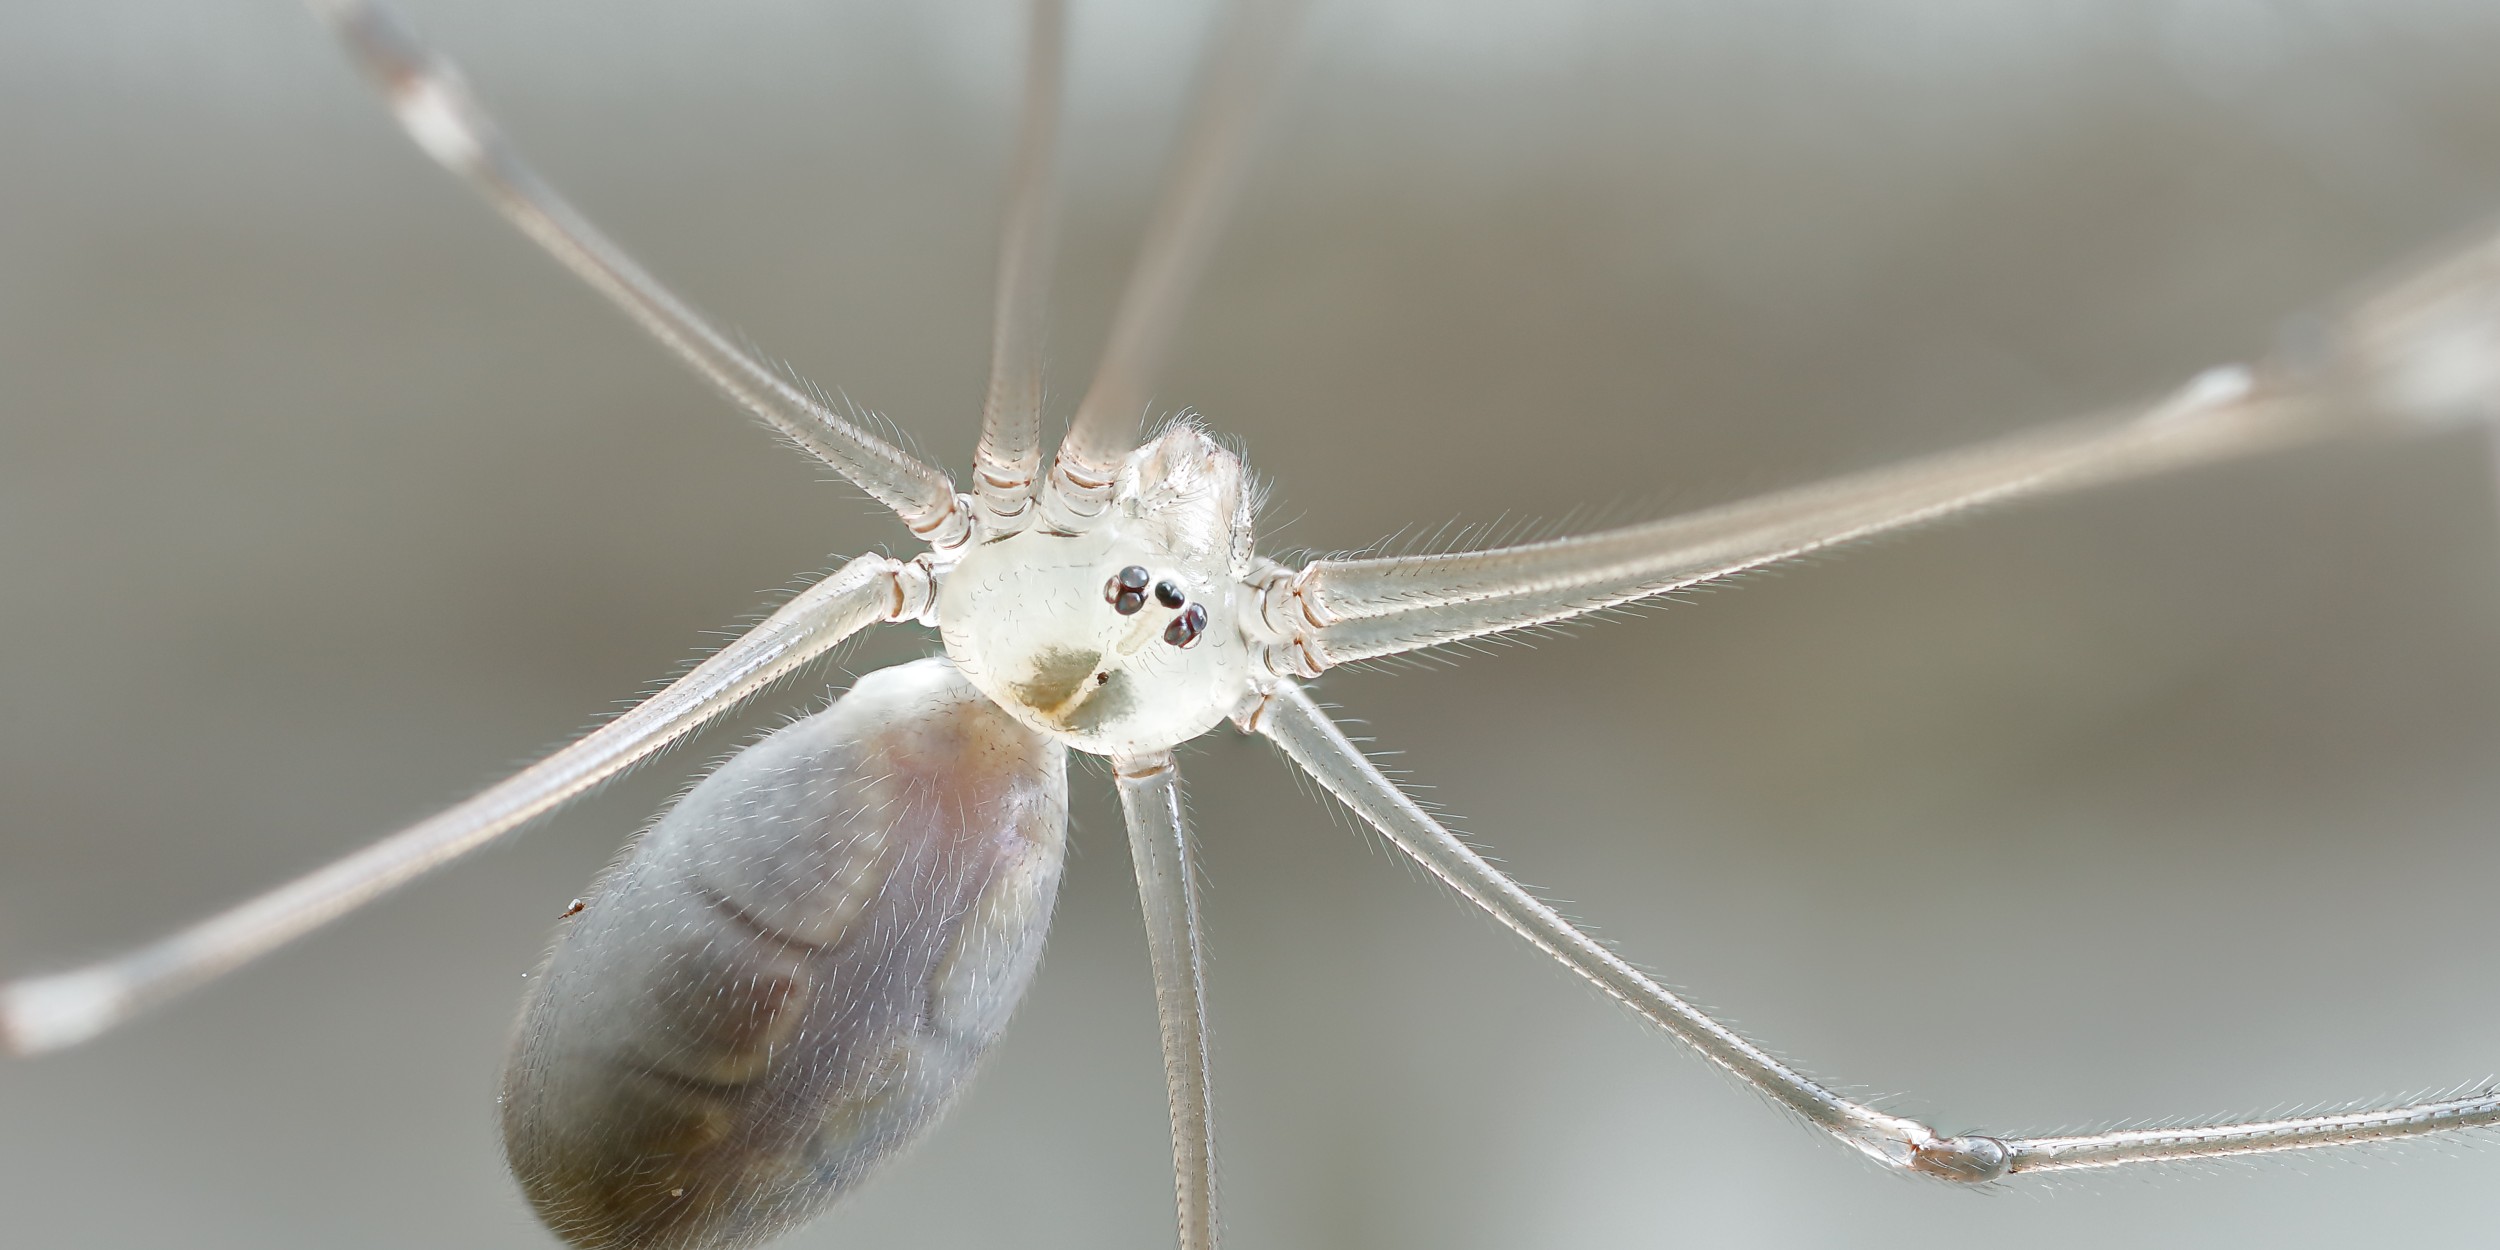 Mummy long-legs, A Daddy long-legs spider carrying her eggs…